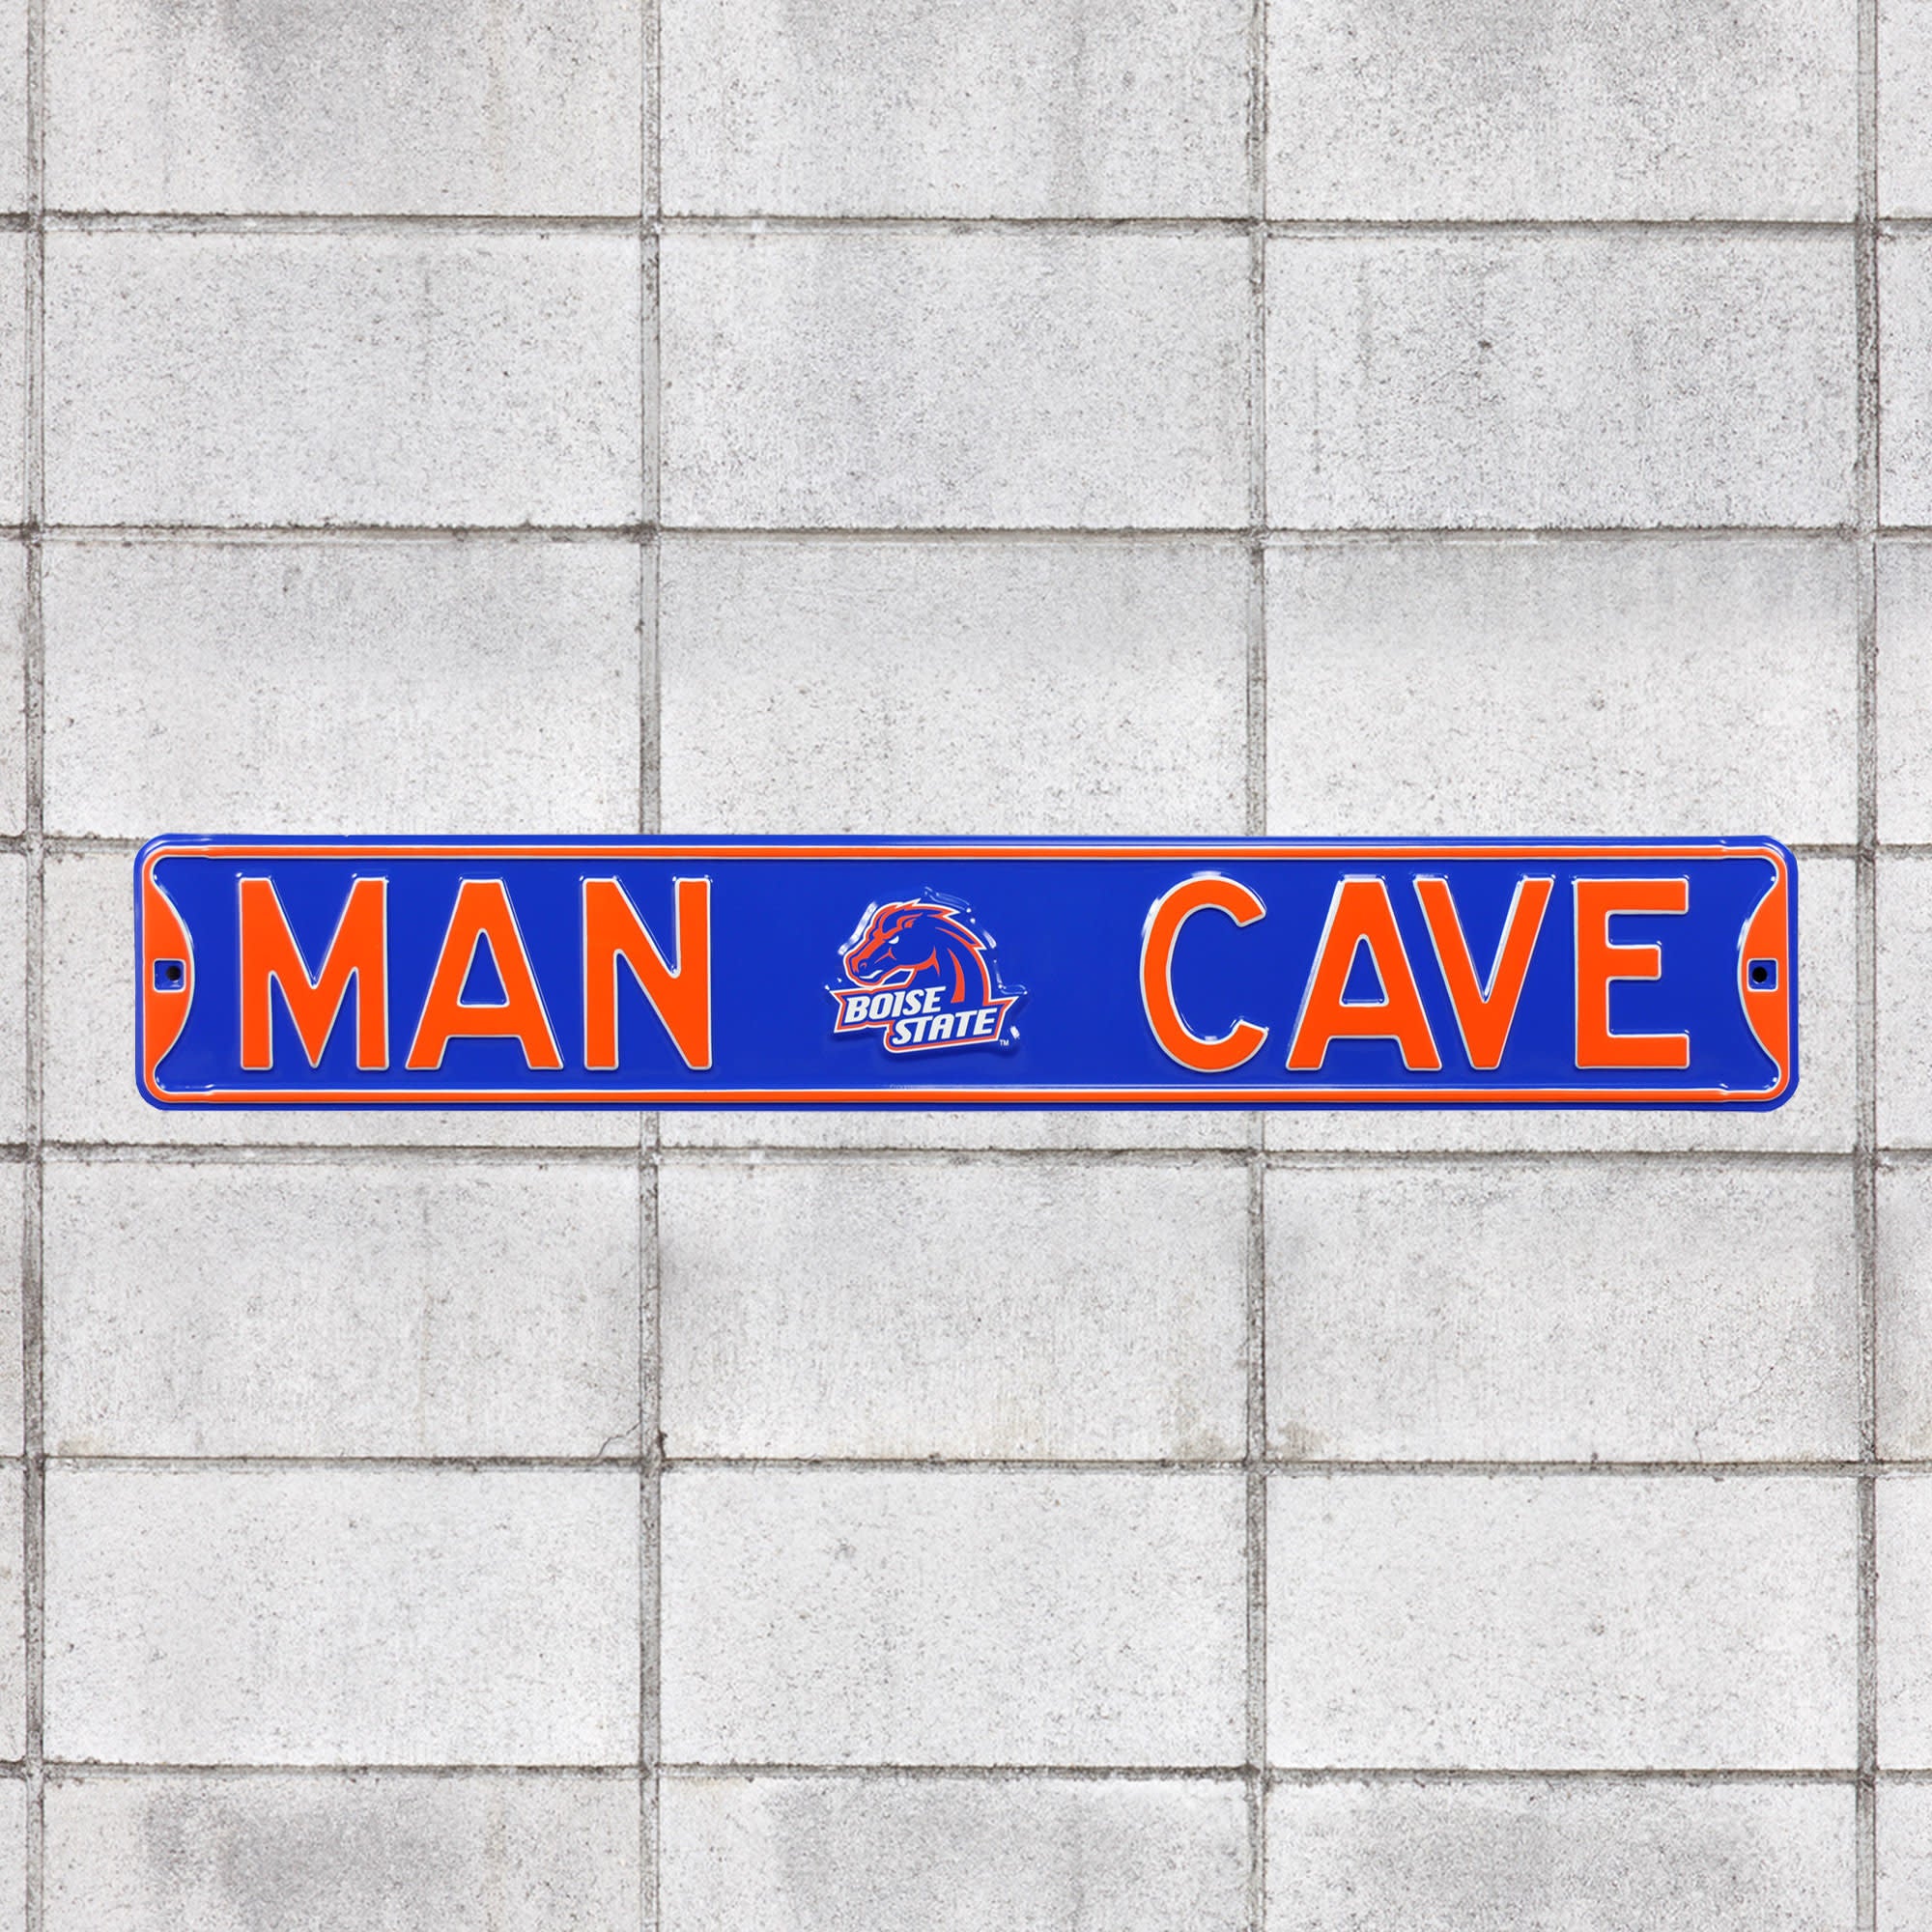 Boise State Broncos: Man Cave - Officially Licensed Metal Street Sign 36.0"W x 6.0"H by Fathead | 100% Steel